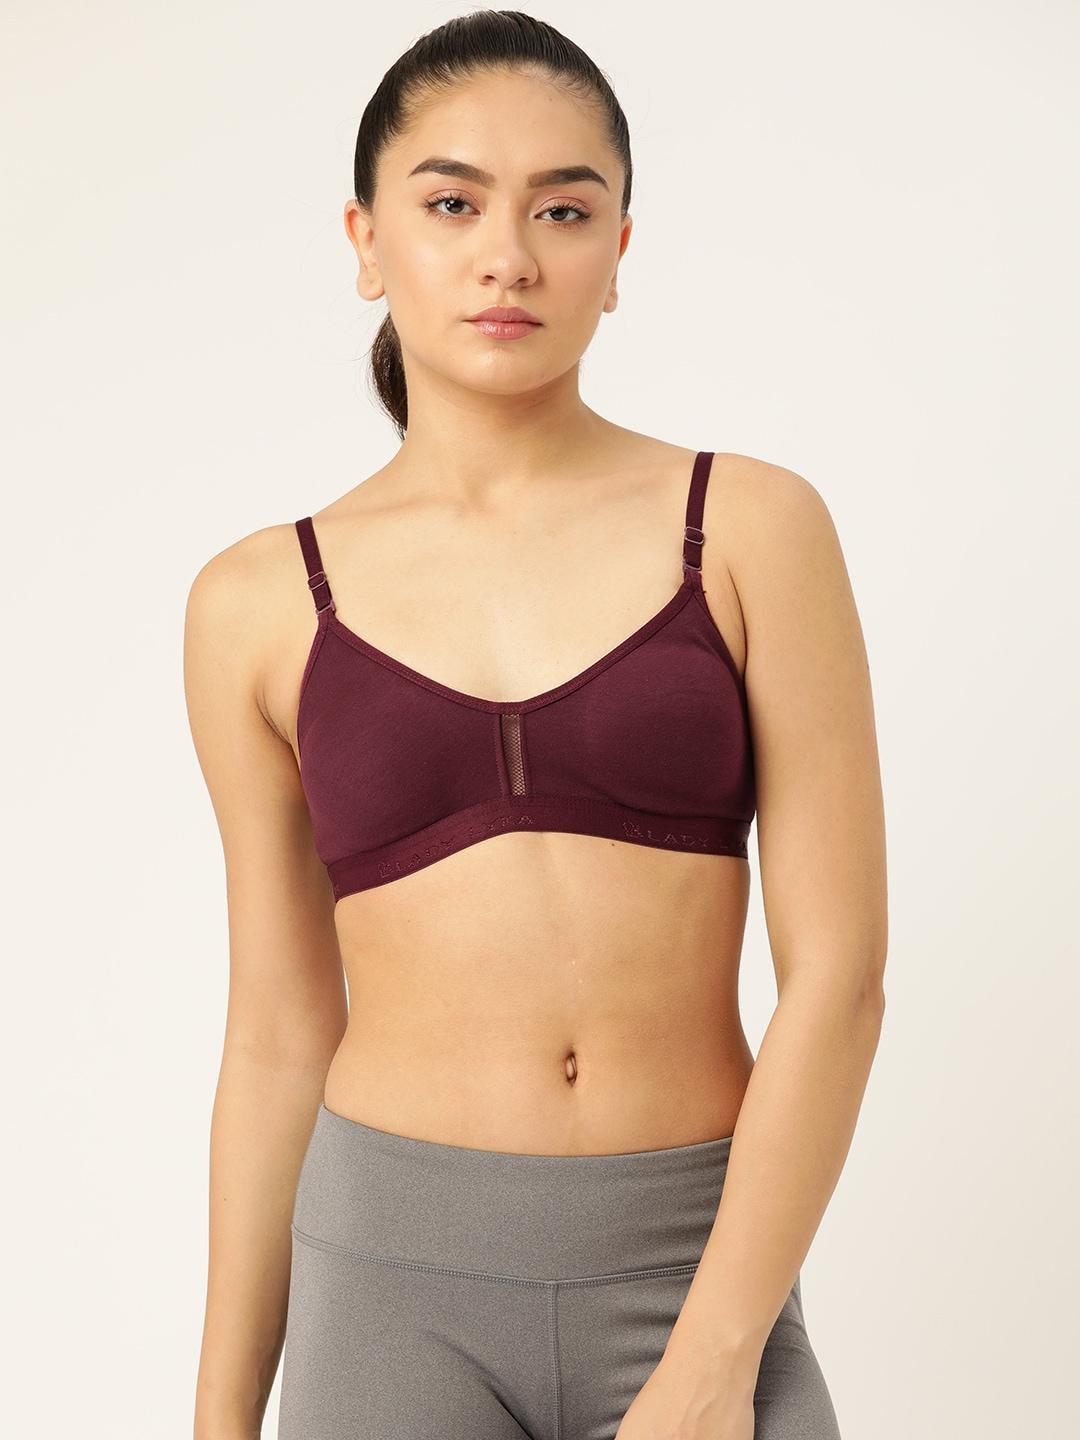 lady lyka burgundy solid cotton workout bra-full coverage non-wired non padded